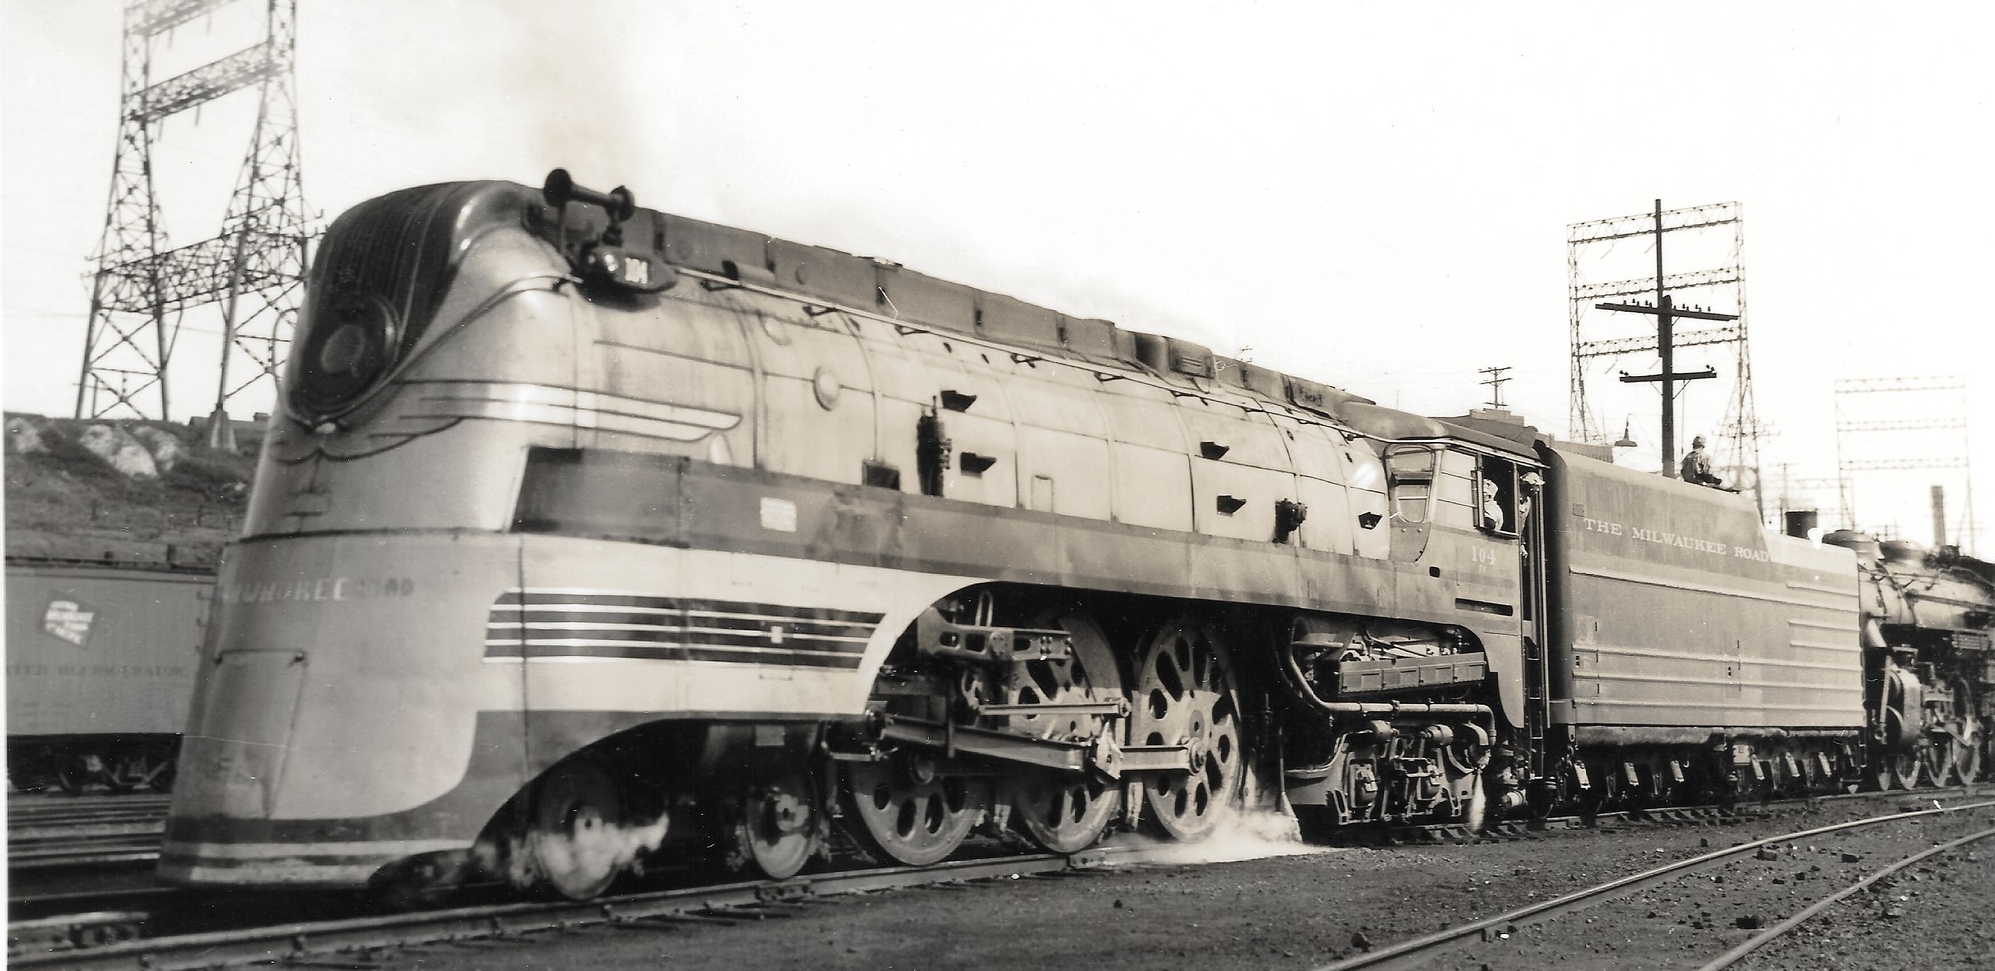 No. 104 in September 1940 at Milwaukee, Wisconsin